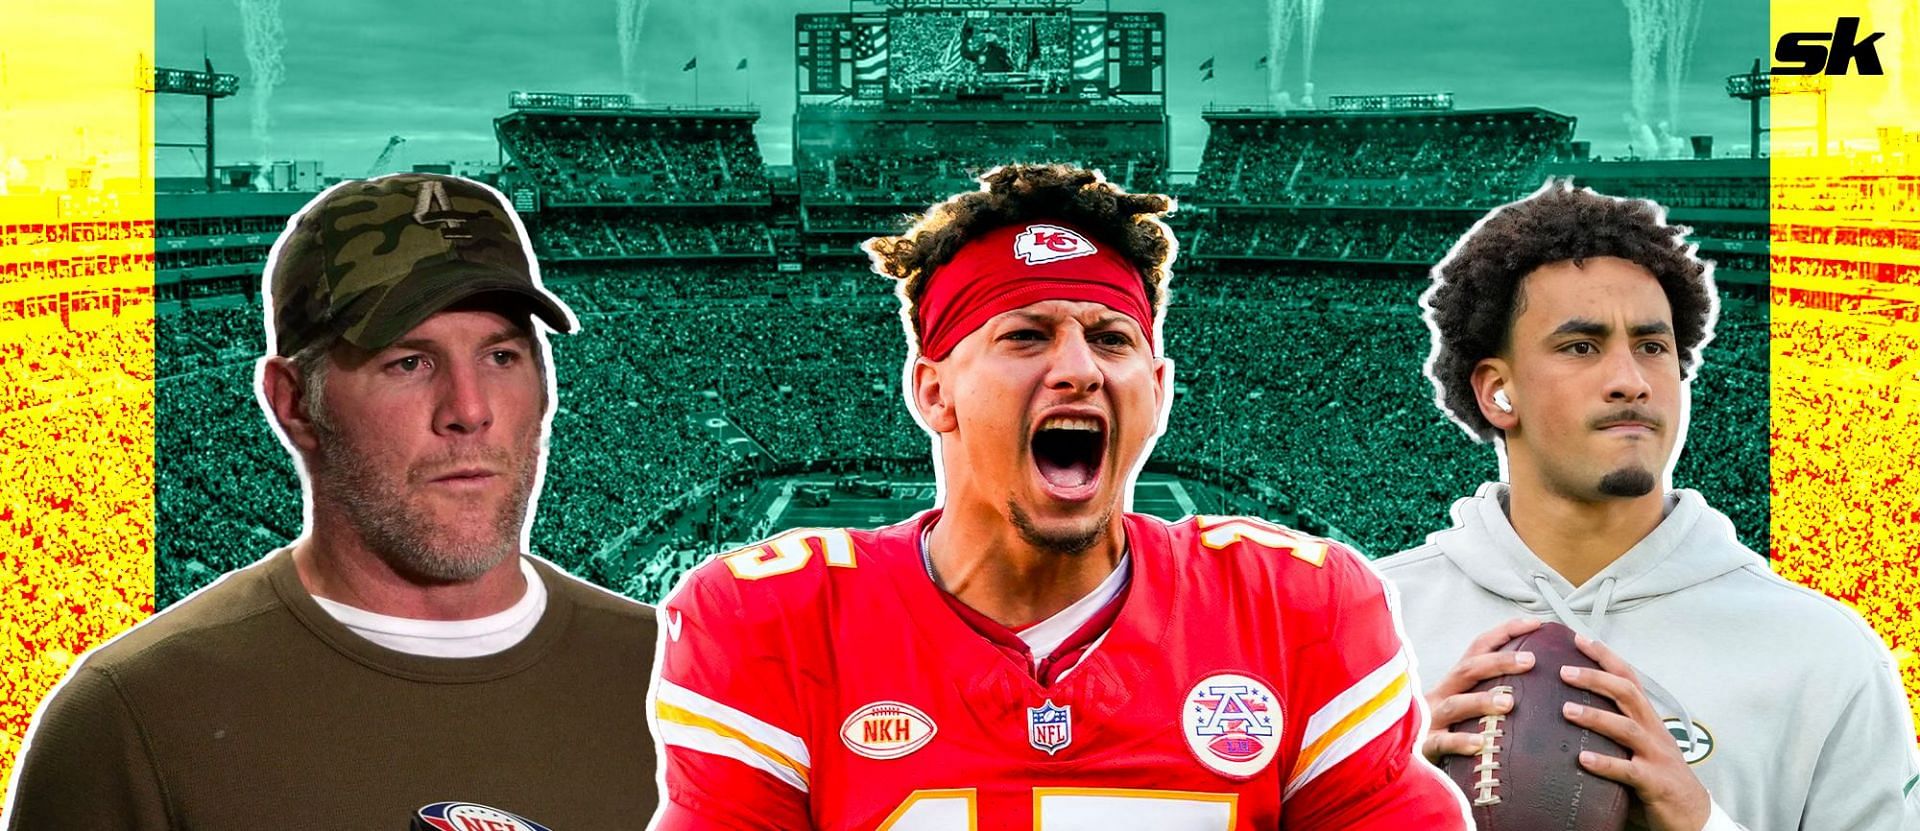 Brett Favre chimes in on Jordan Love slaying Patrick Mahomes&rsquo; Chiefs after tossing 3TDs on SNF